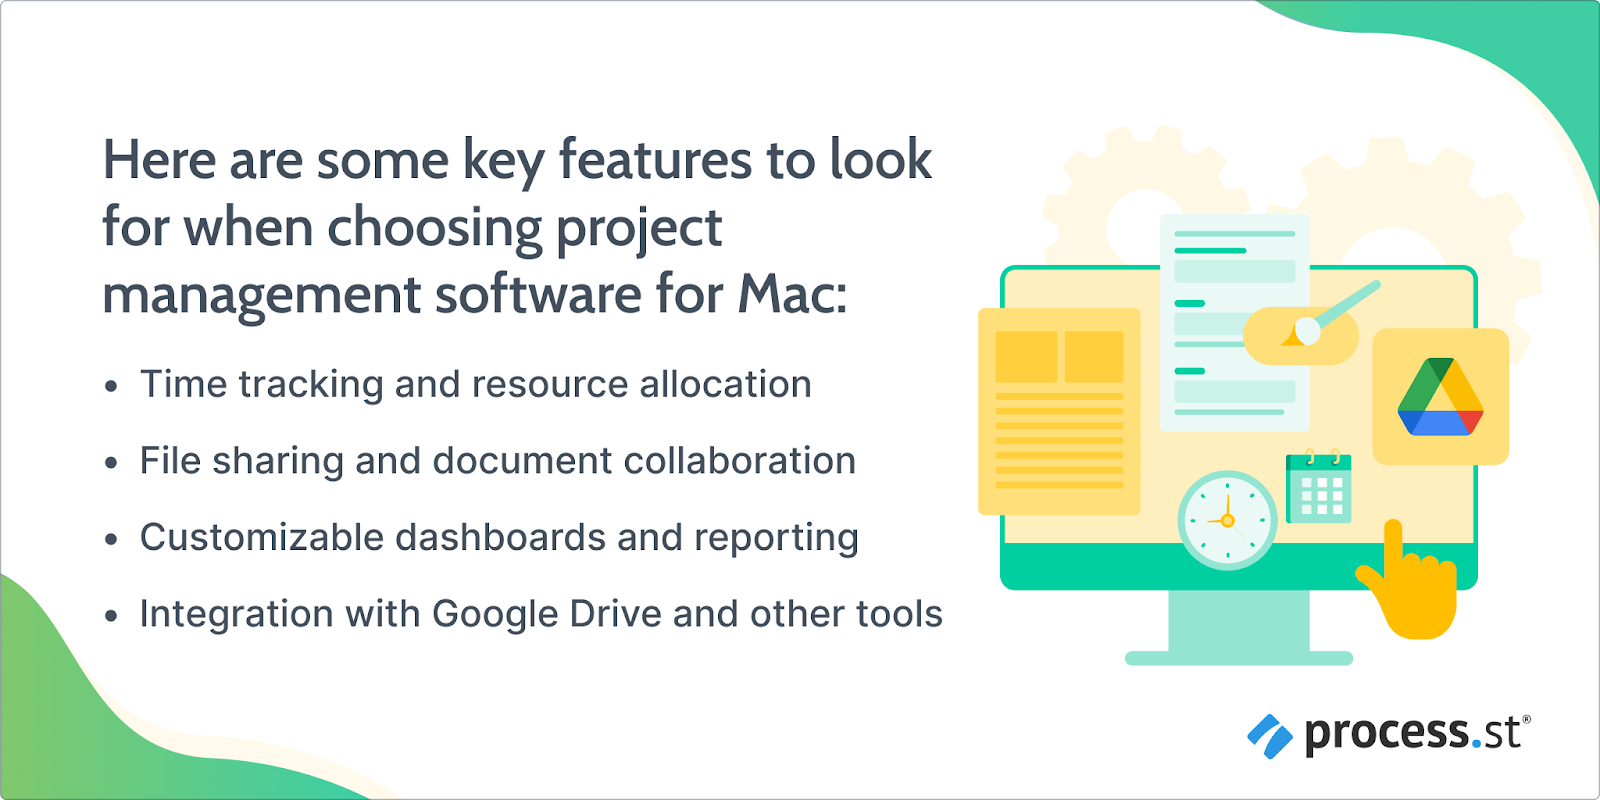 Image showing the key features to look for when selecting project management software for Mac